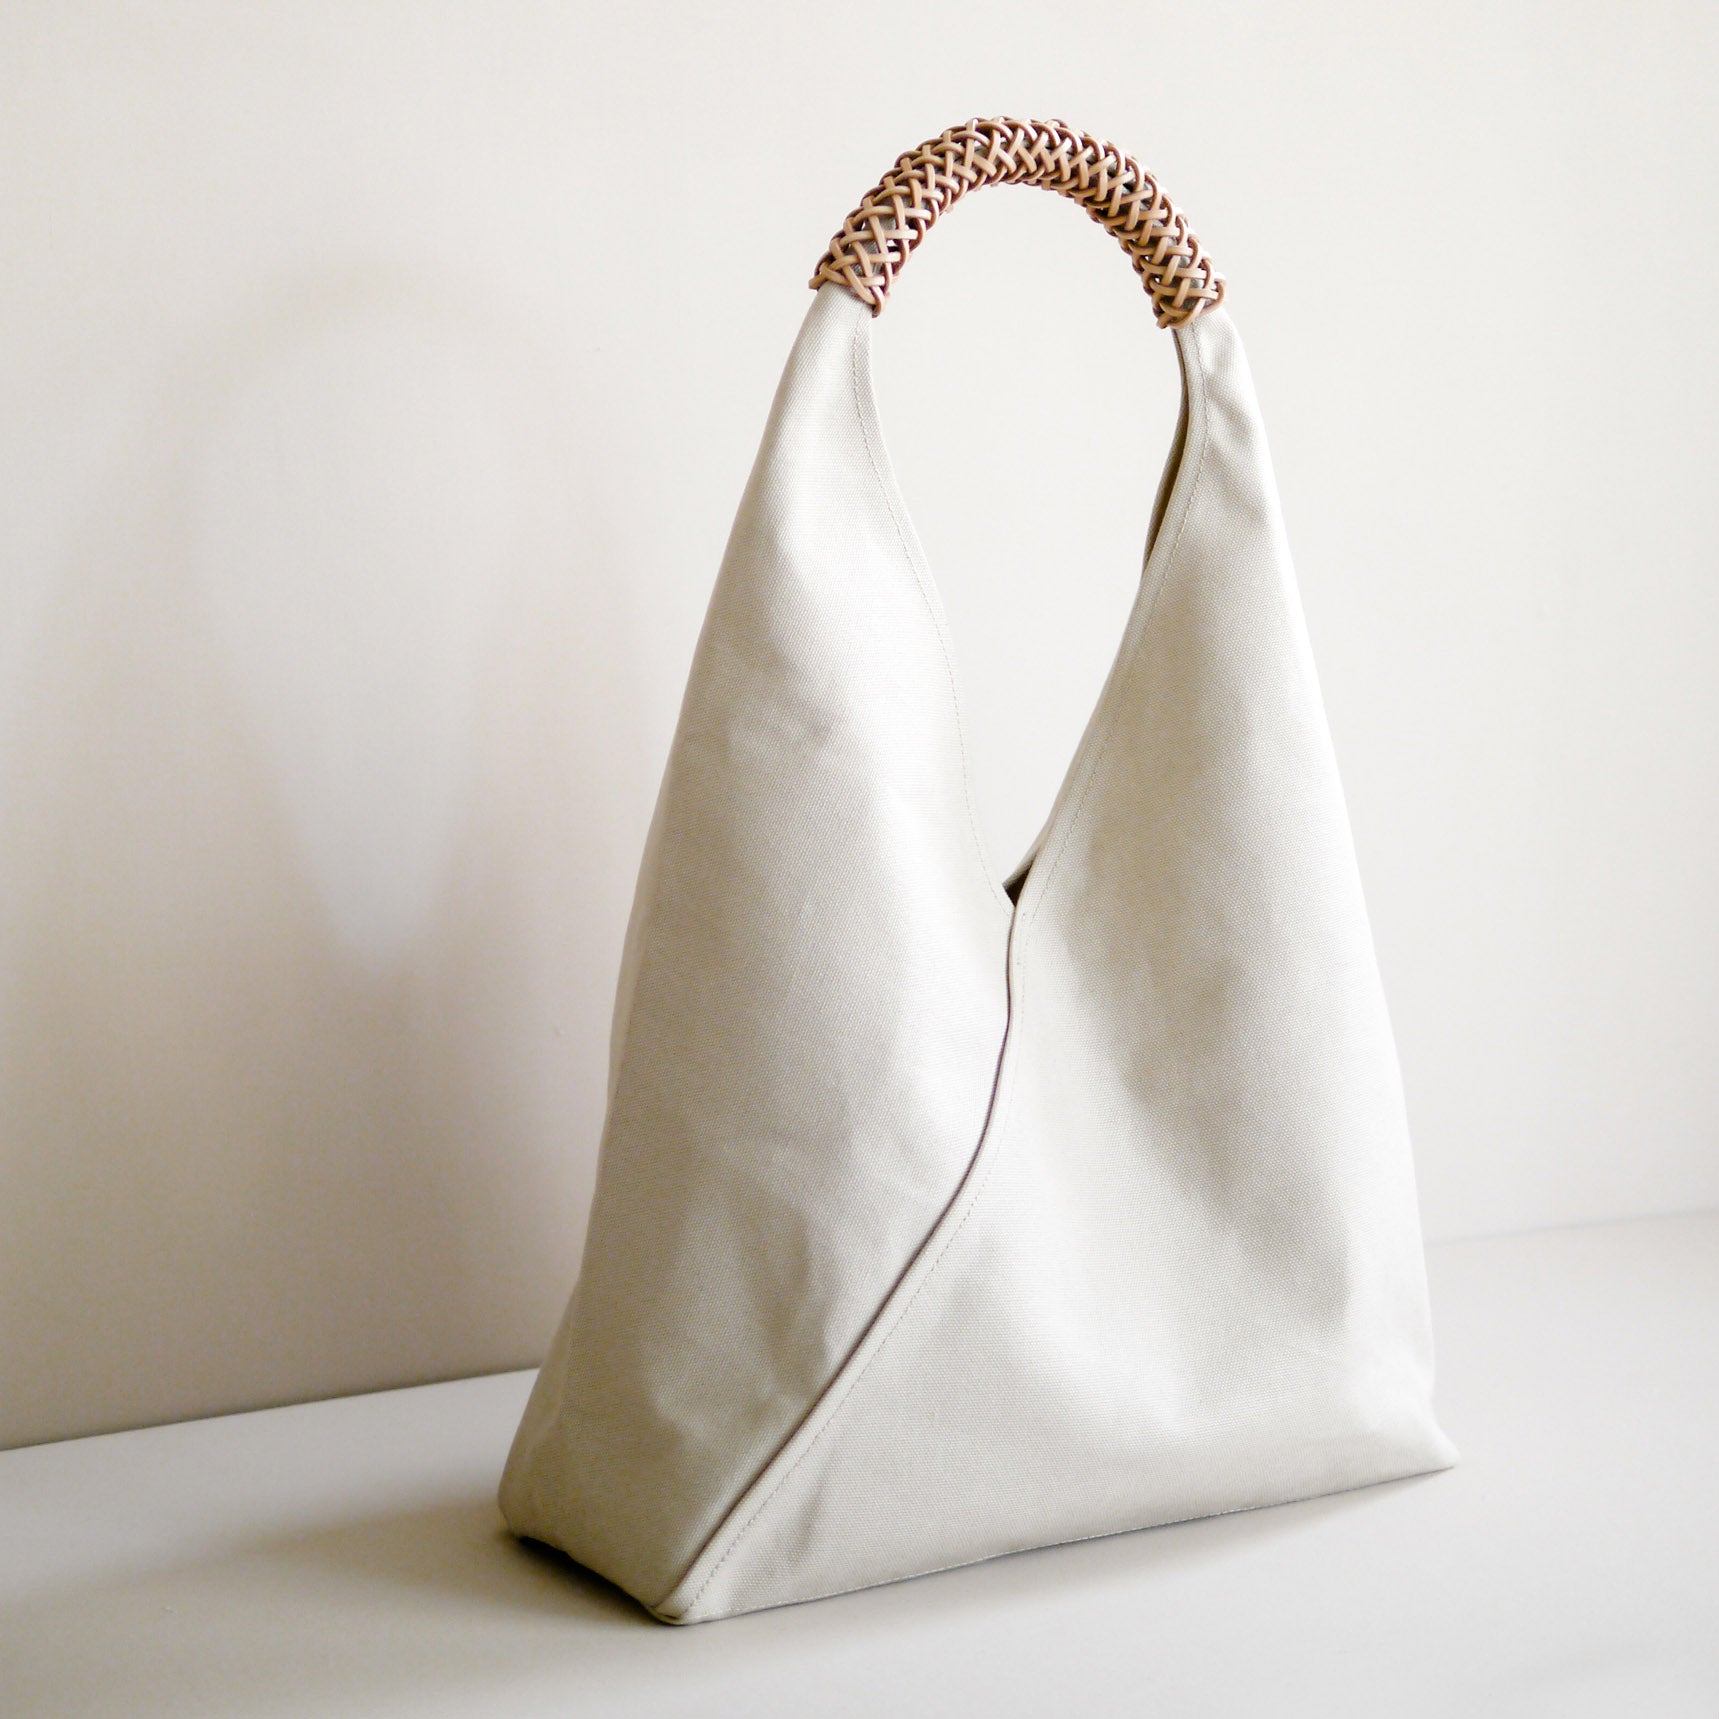 Woven Triangle Bag - Ink – MoMA Design Store